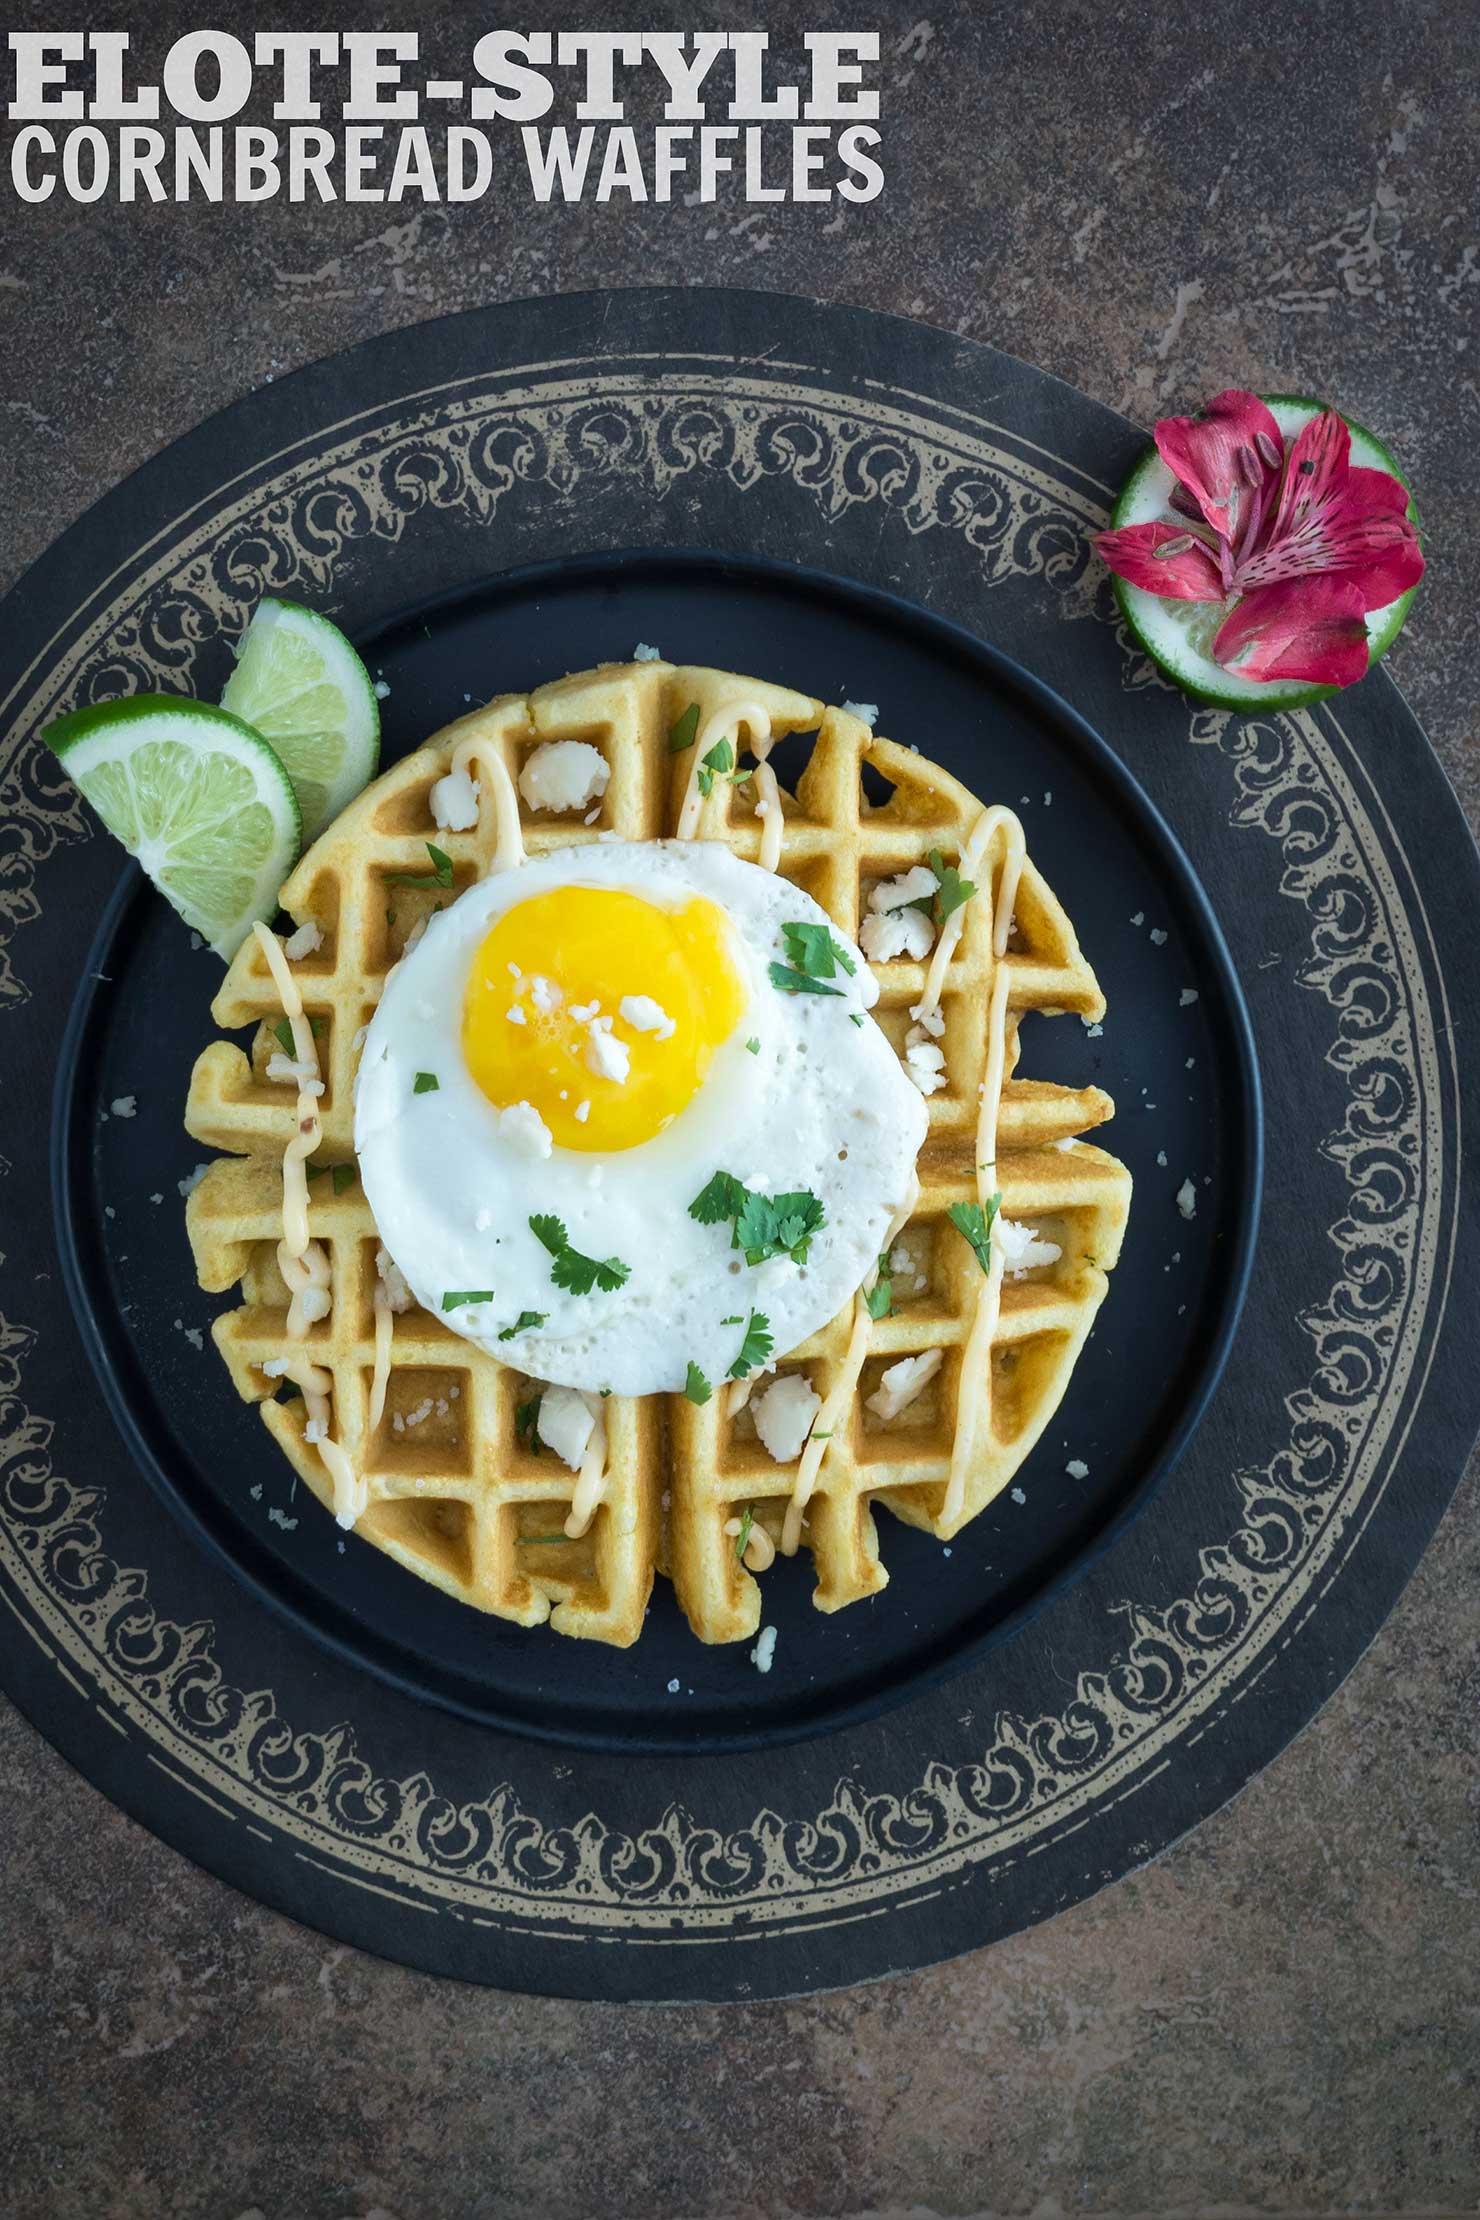 Elote-Style Cornbread Waffles with a Fried Egg | Kailley's Kitchen